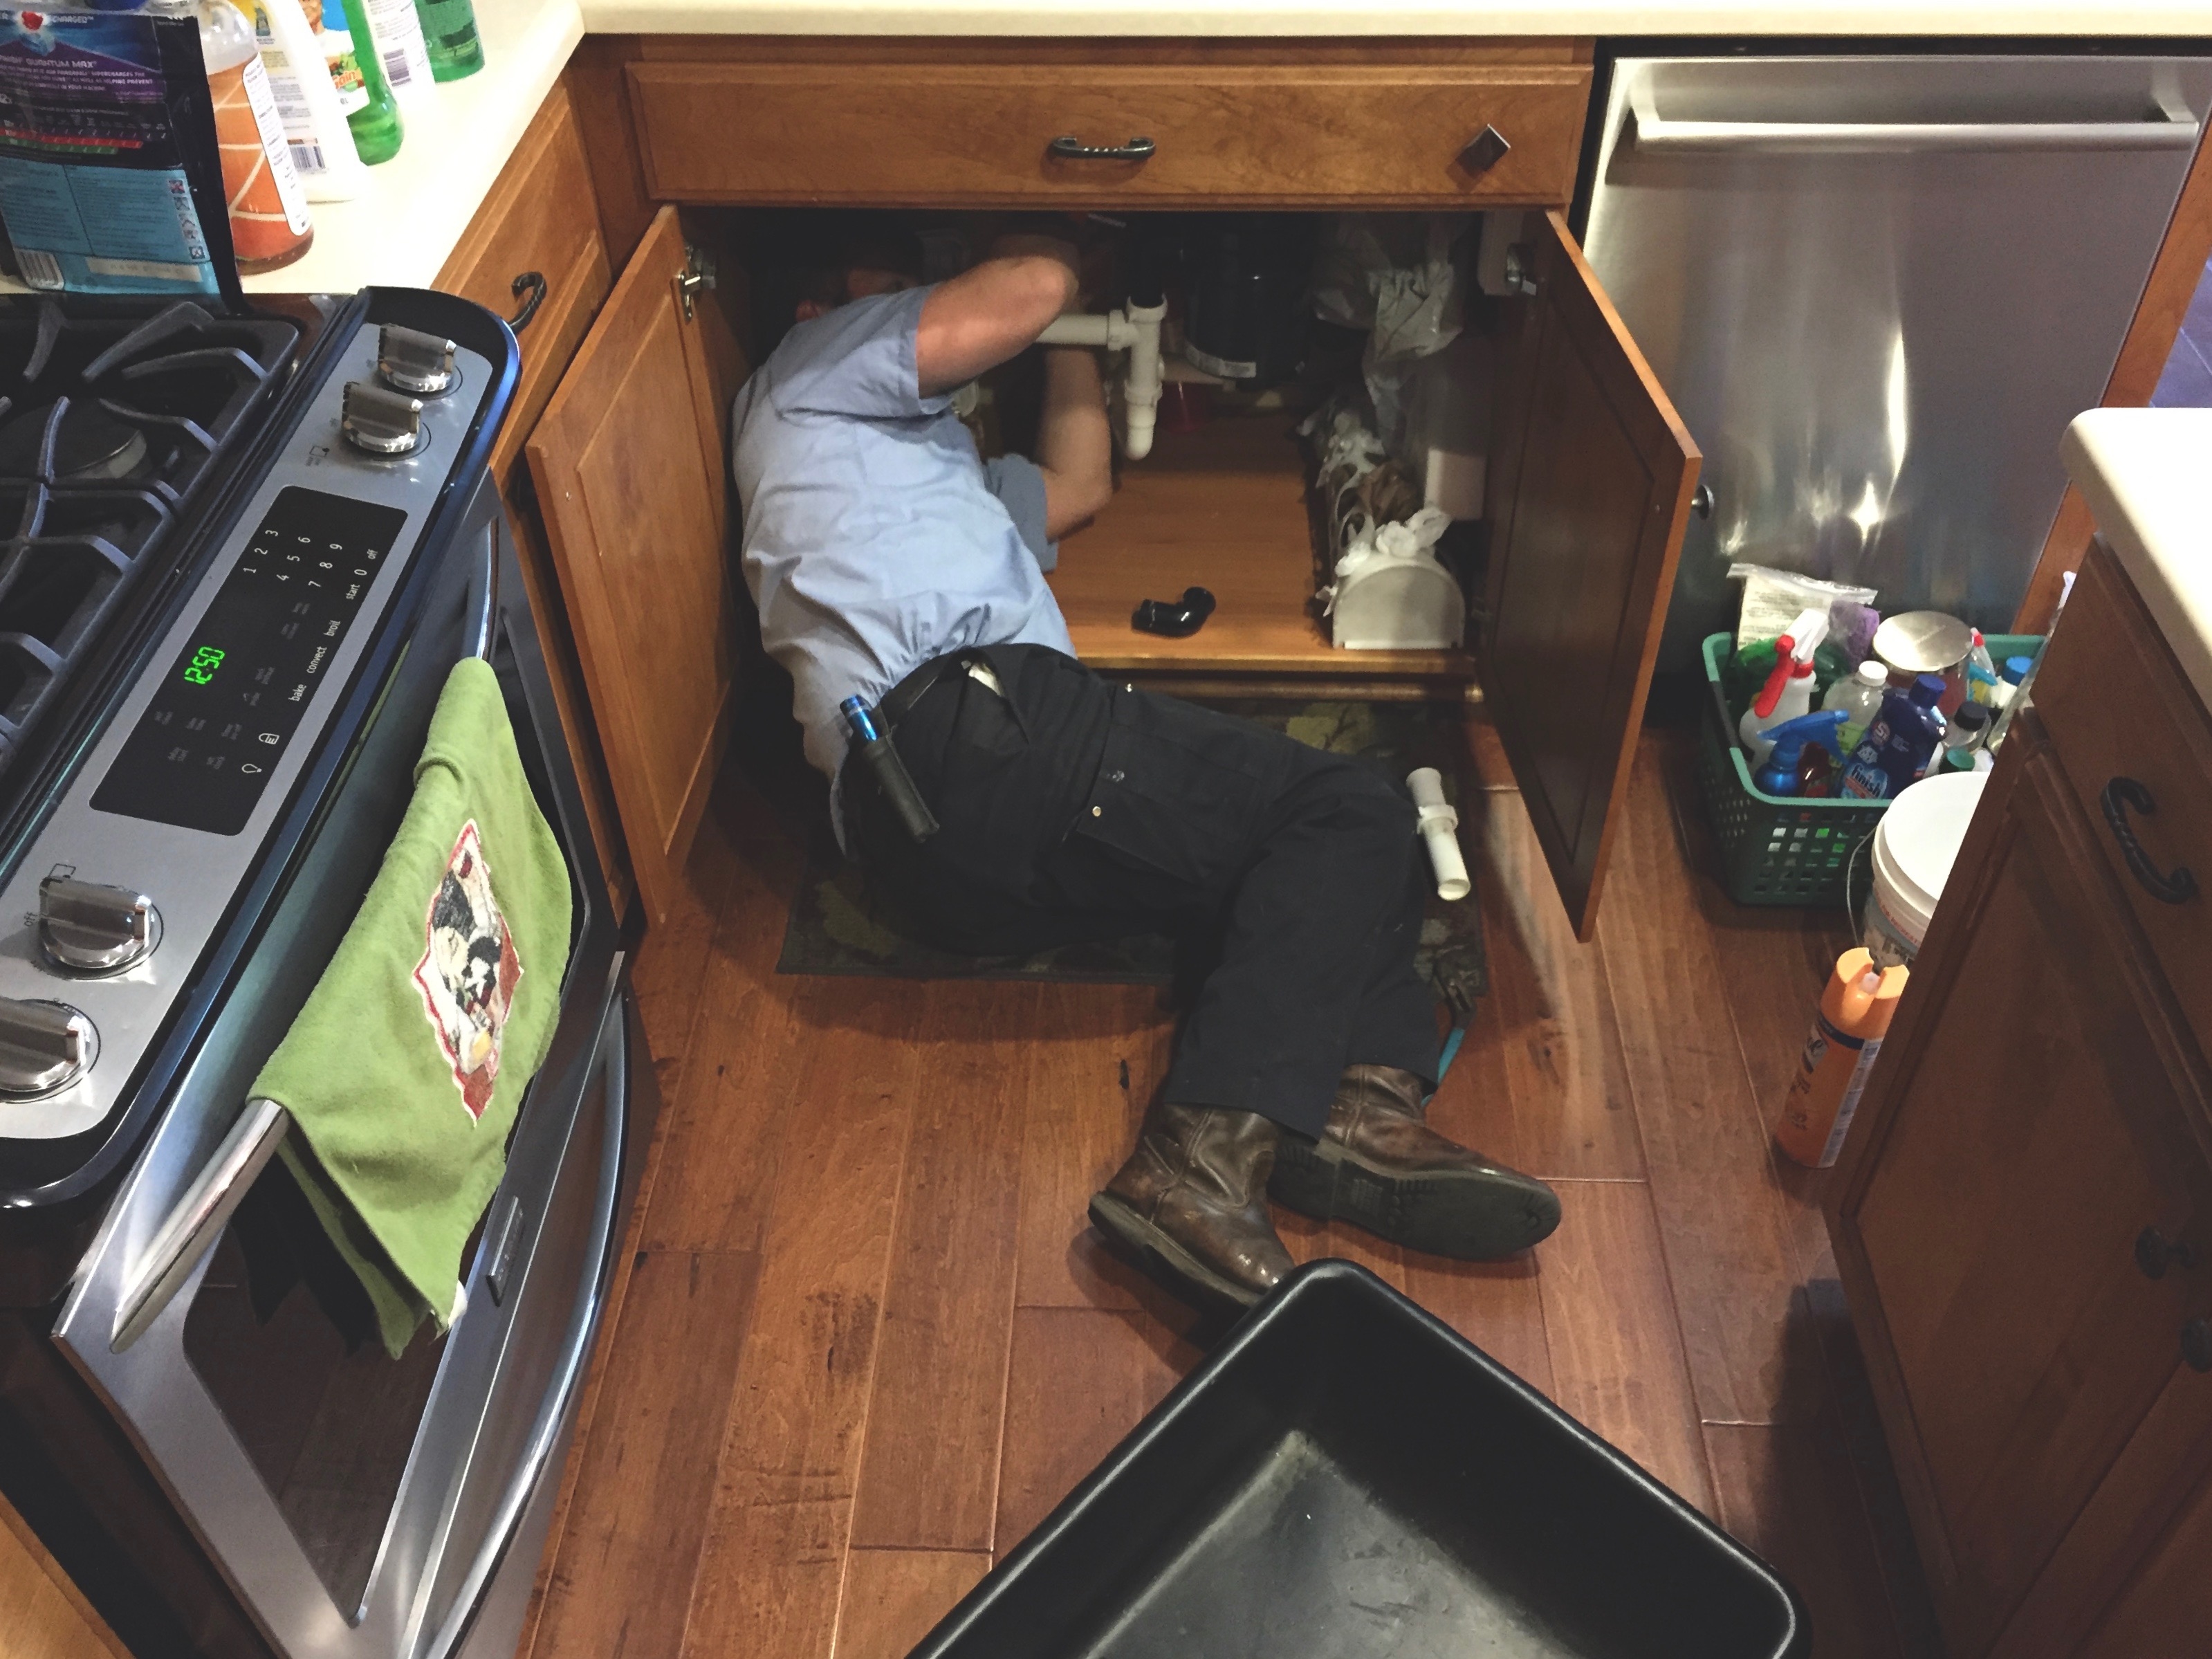 Man working under the kitchen sink fixing the plumbing.